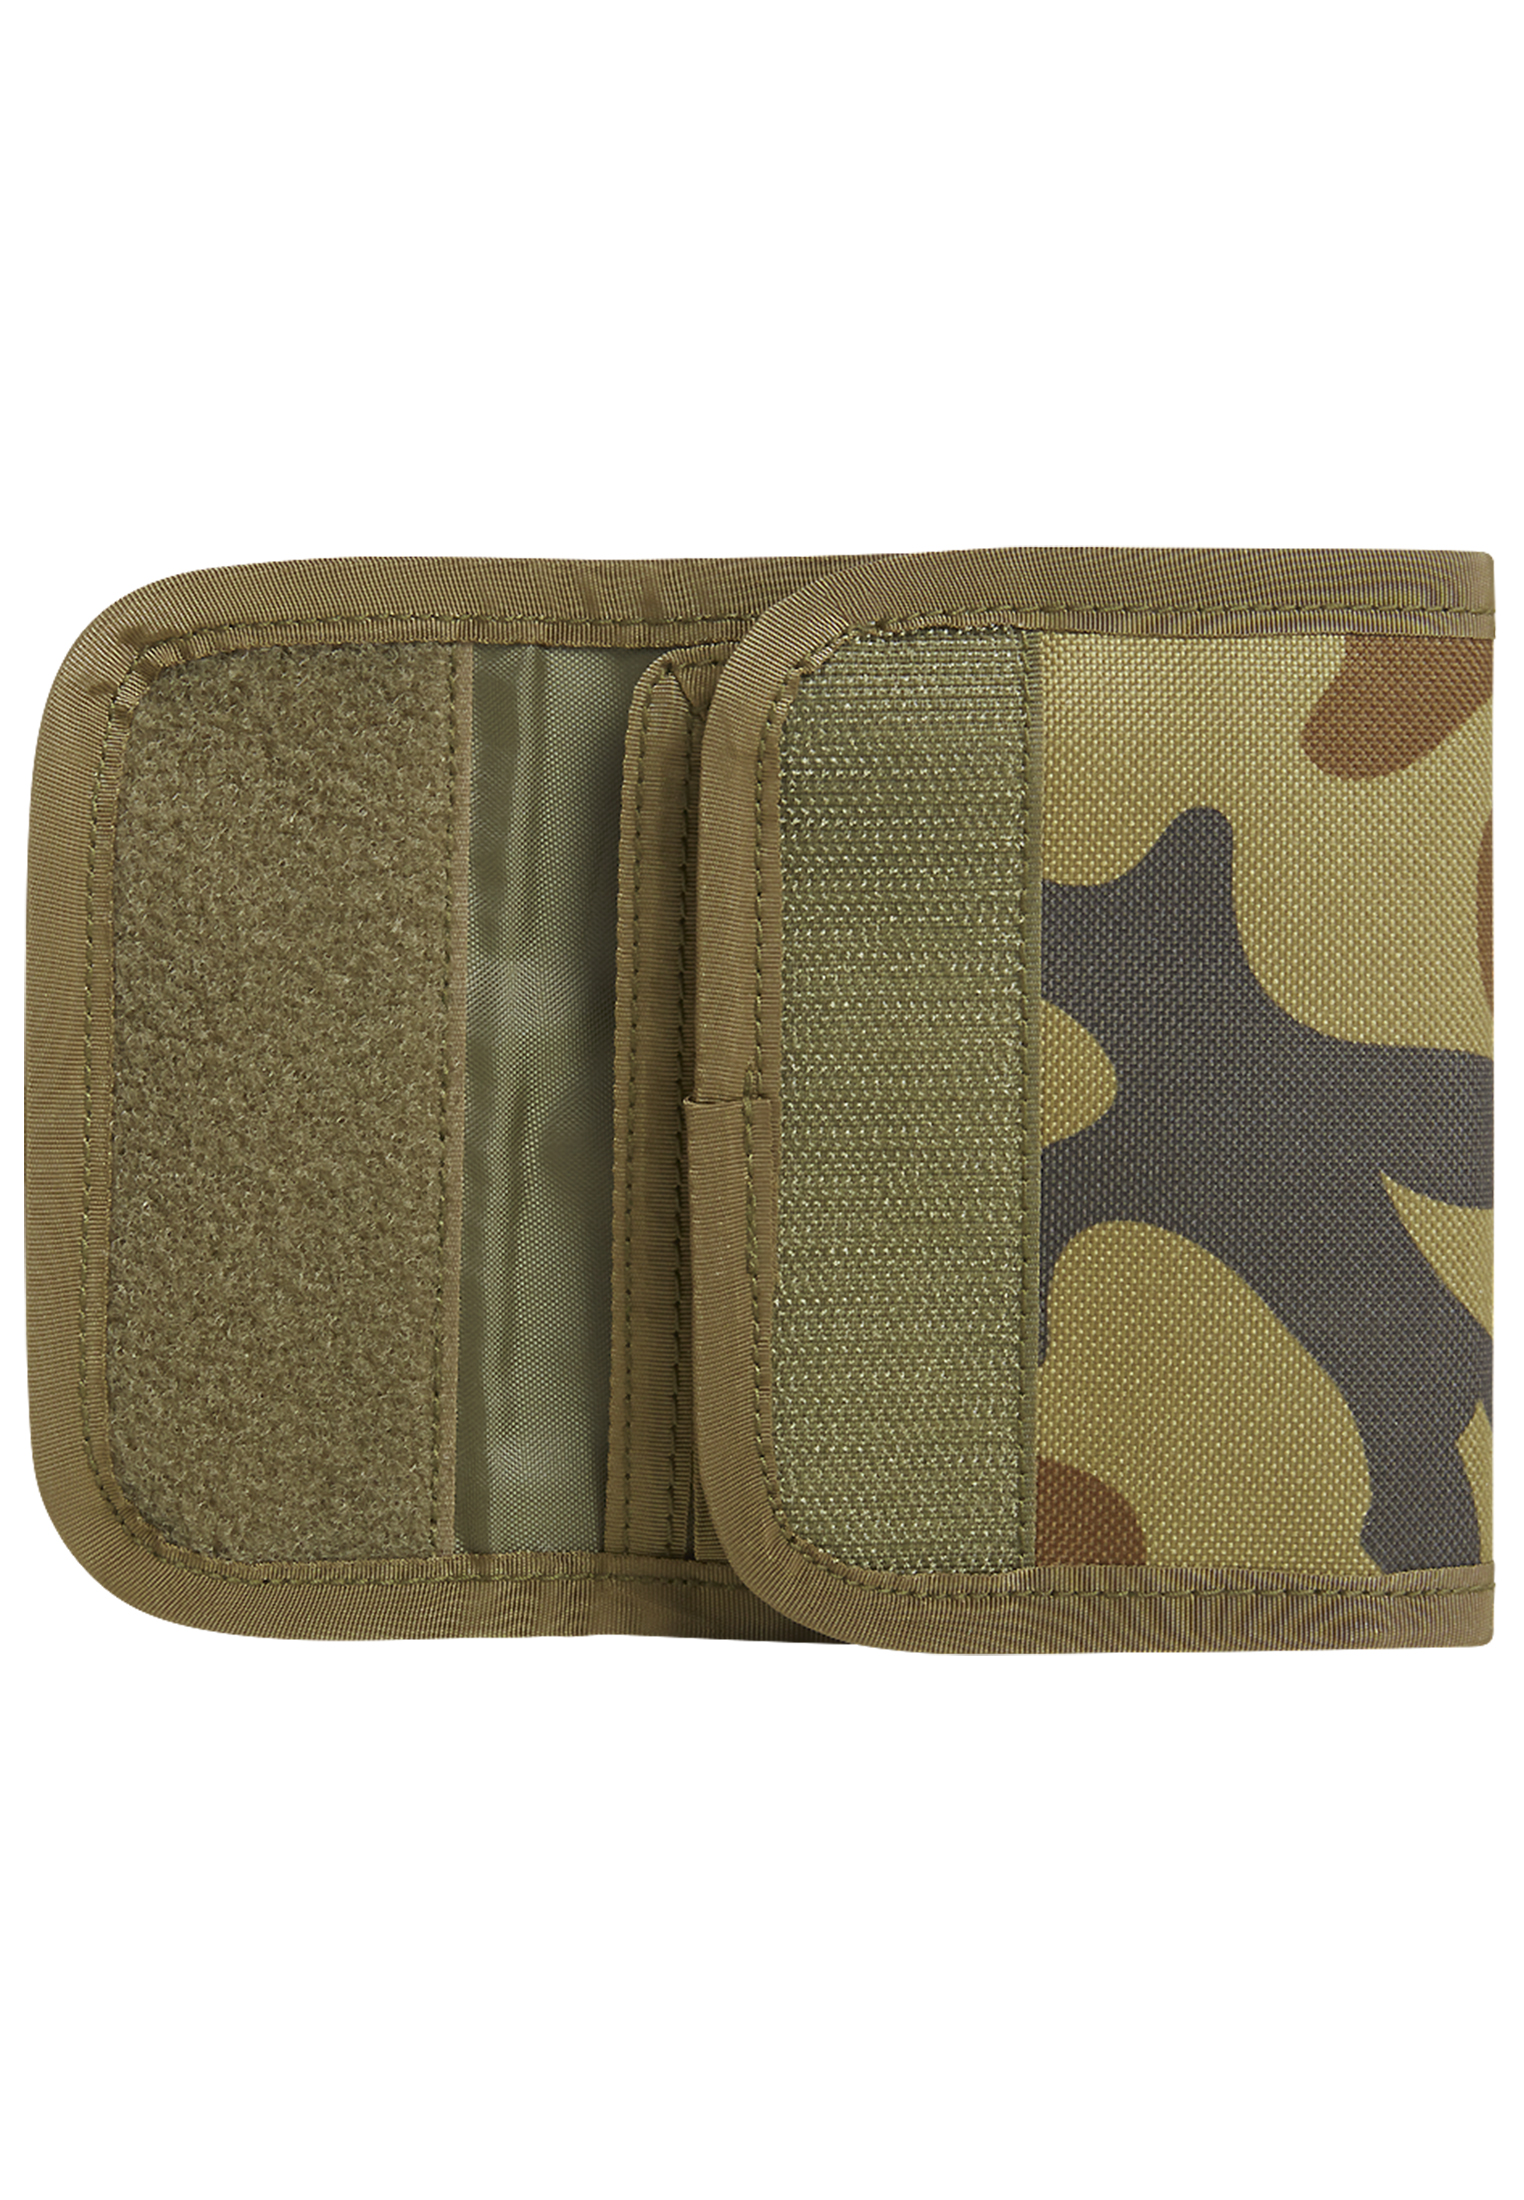 Accessoires wallet five in Farbe woodland